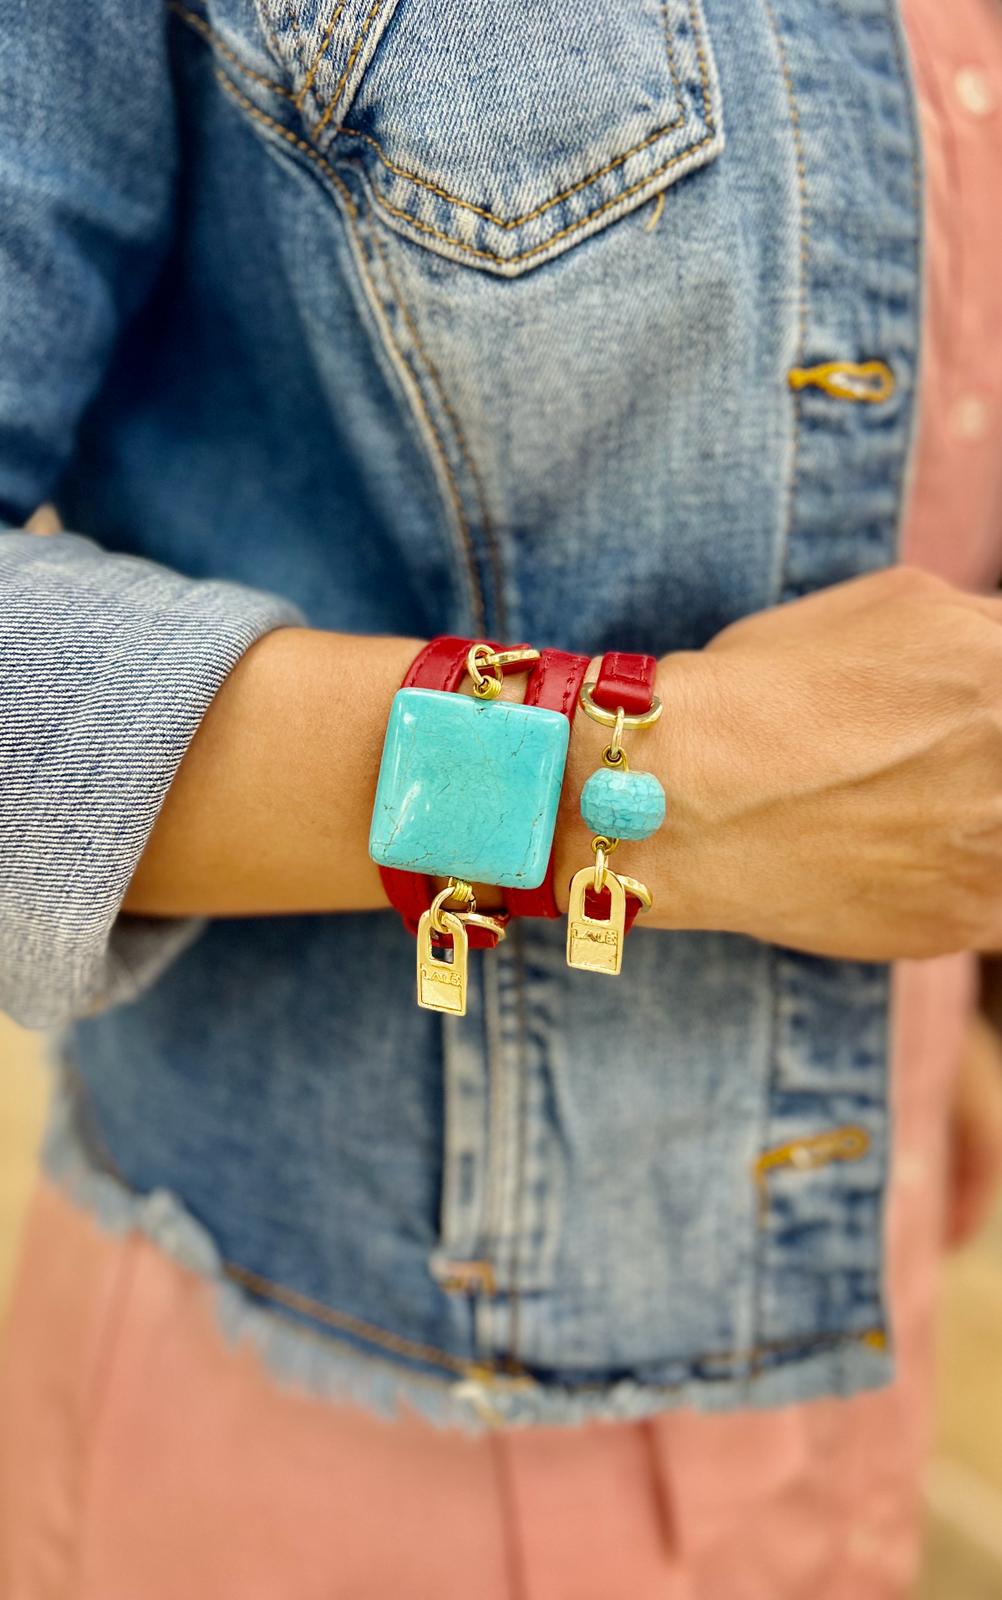 Handcrafted Red Leather Bracelet with Turquoise Stone | Unique Gift Idea - LALEBRACELETS